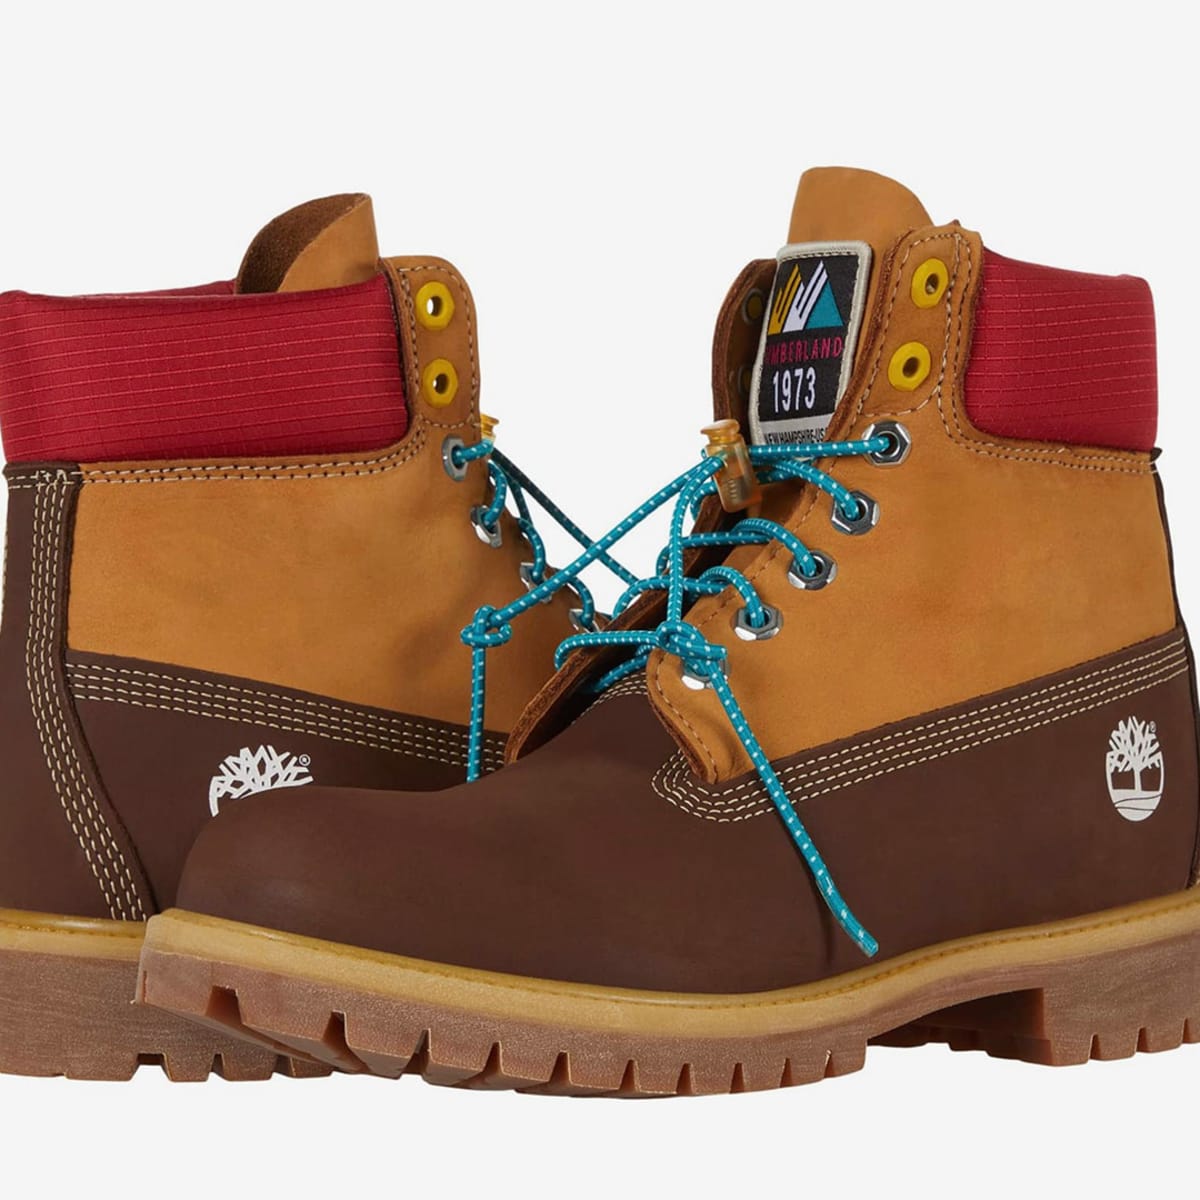 Get Yourself a New Pair of Timberland Boots From Zappos - Men's Journal